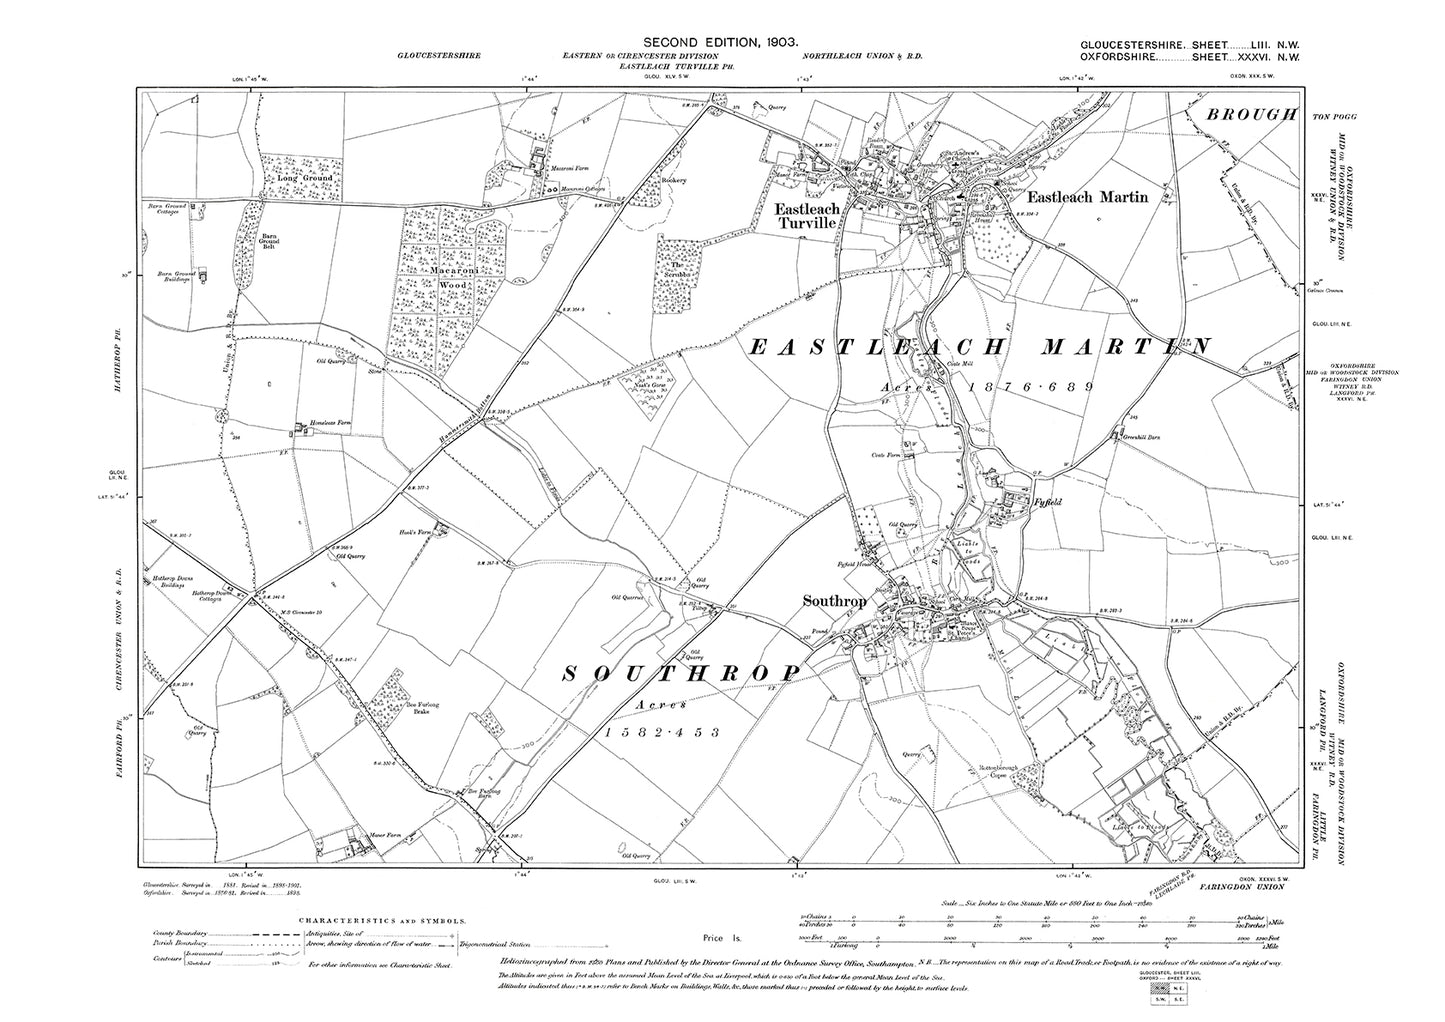 Old OS map dated 1903, showing Eastleach Turville, Southrop, Eastleach Martin in Gloucestershire - 53NW